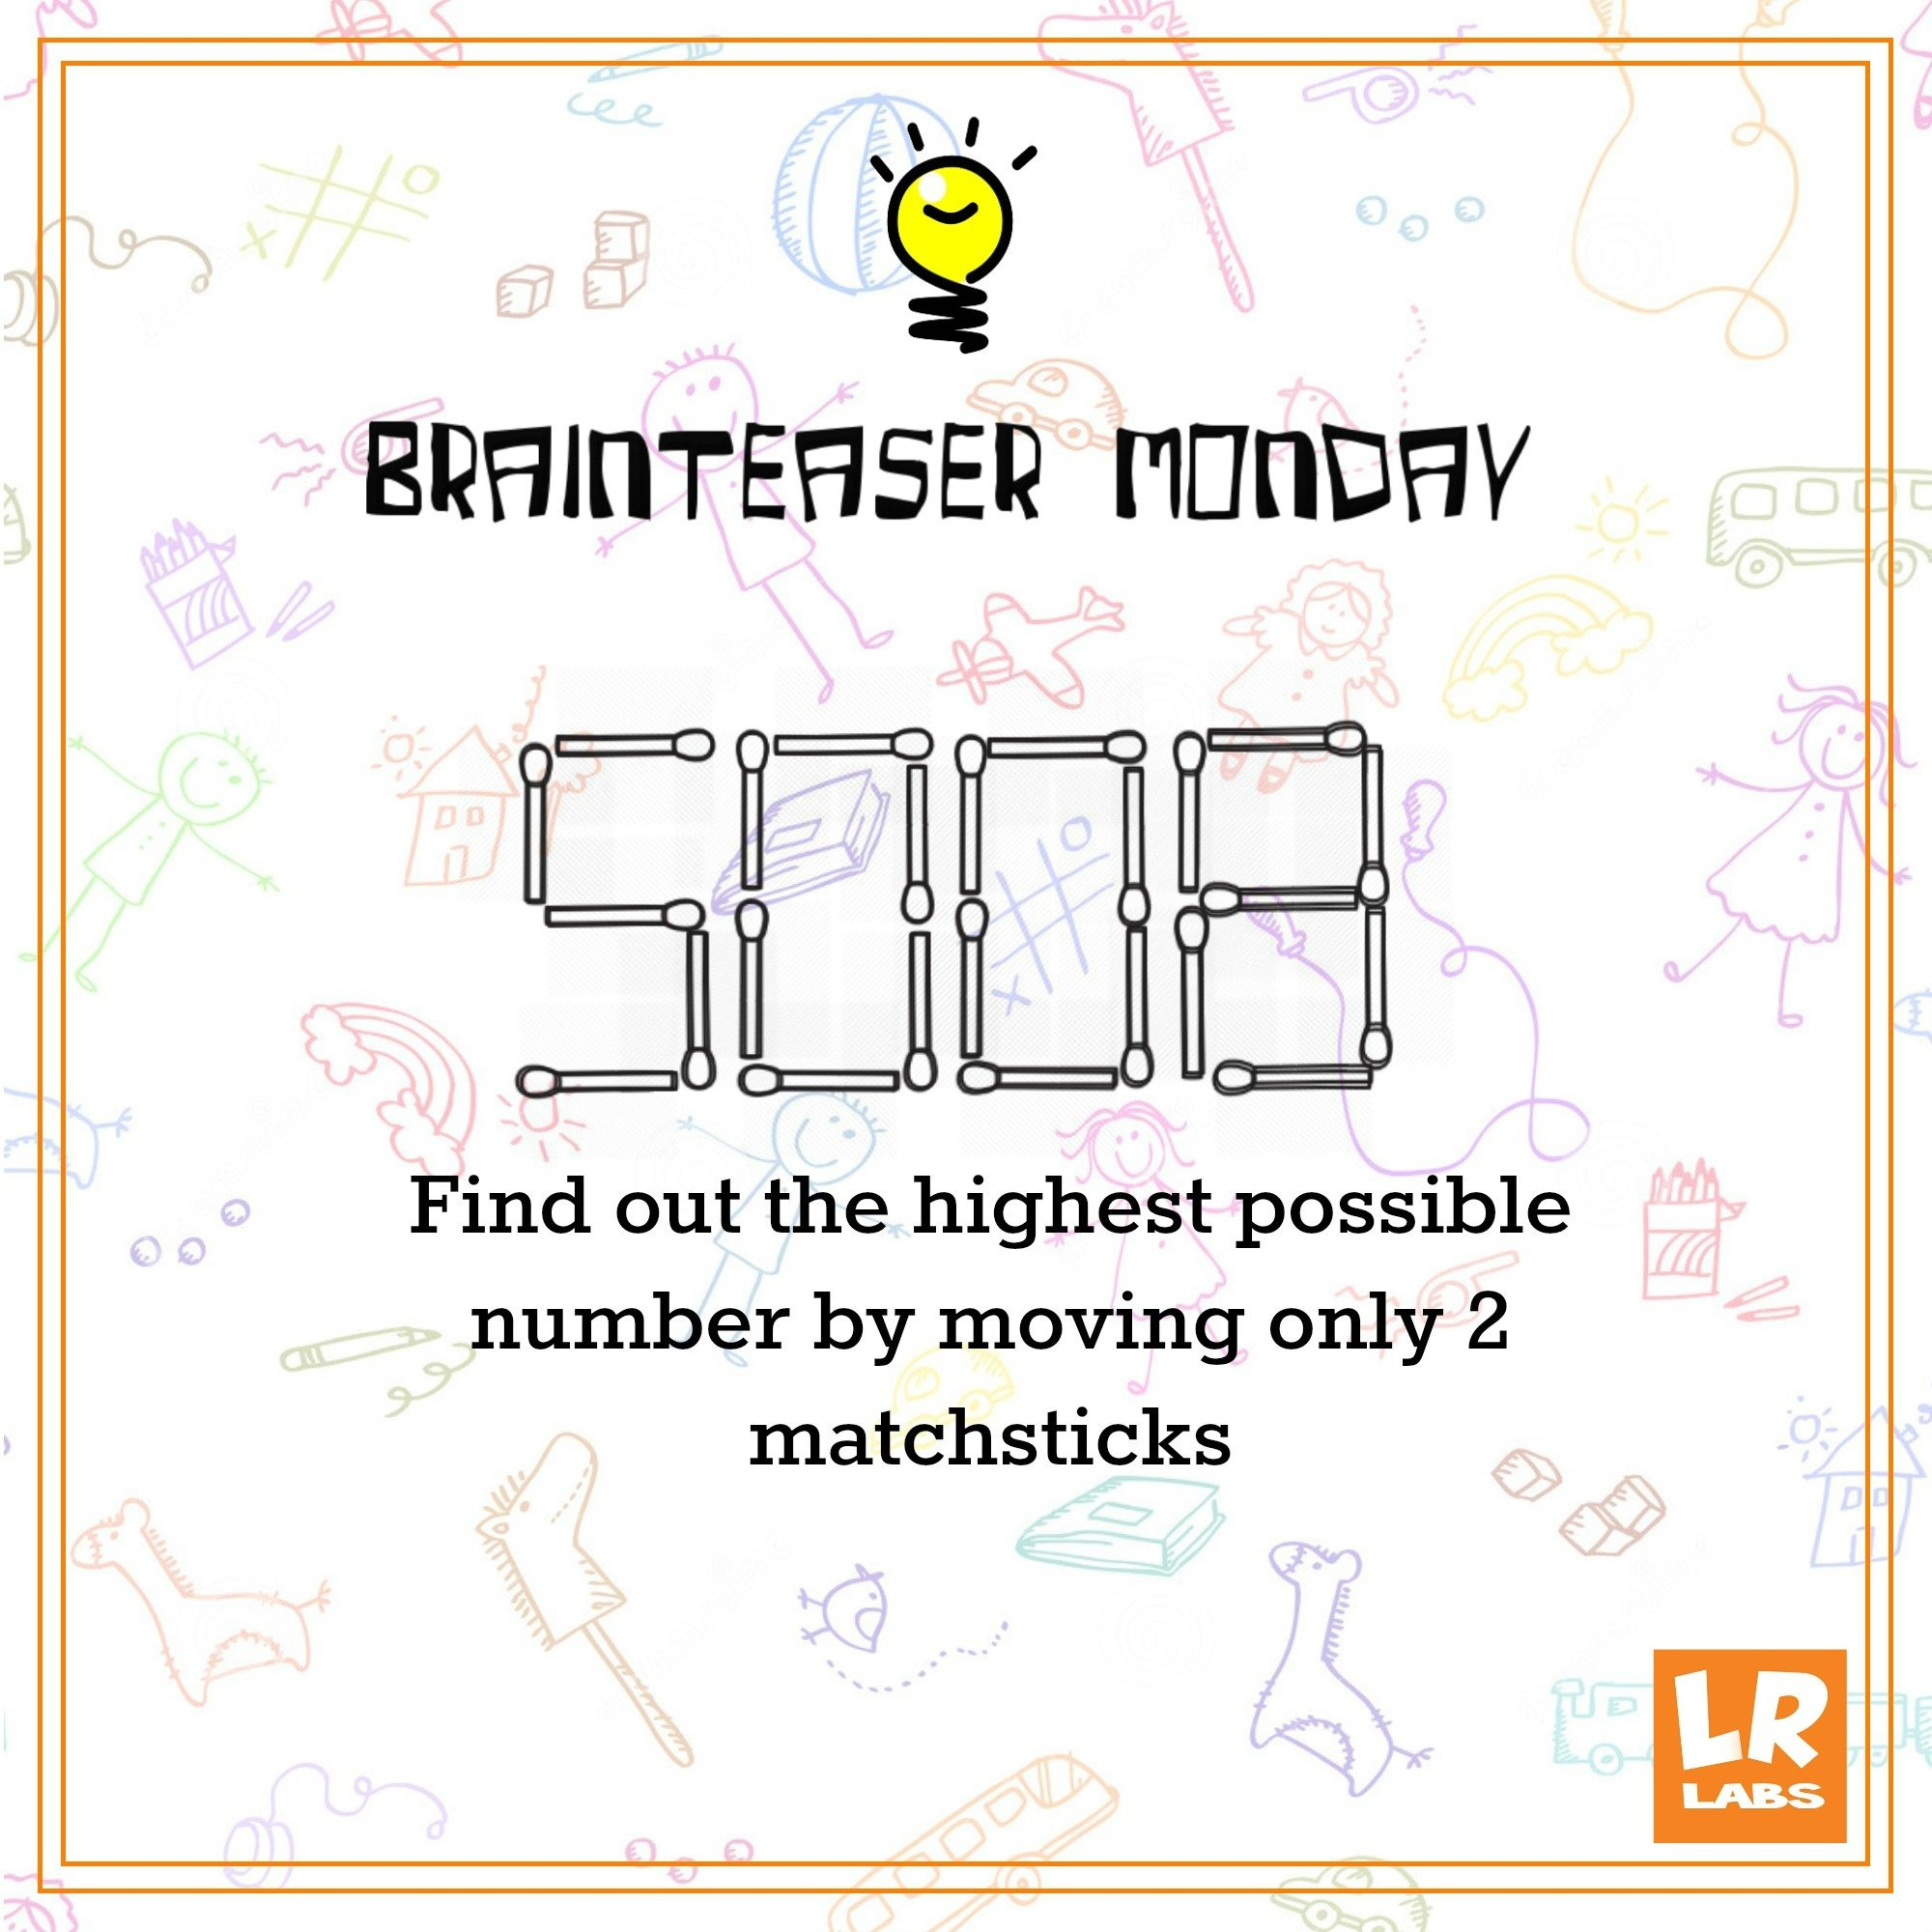 Brainteaser - The Matchstick Puzzle - Logicroots - Printable Matchstick Puzzles